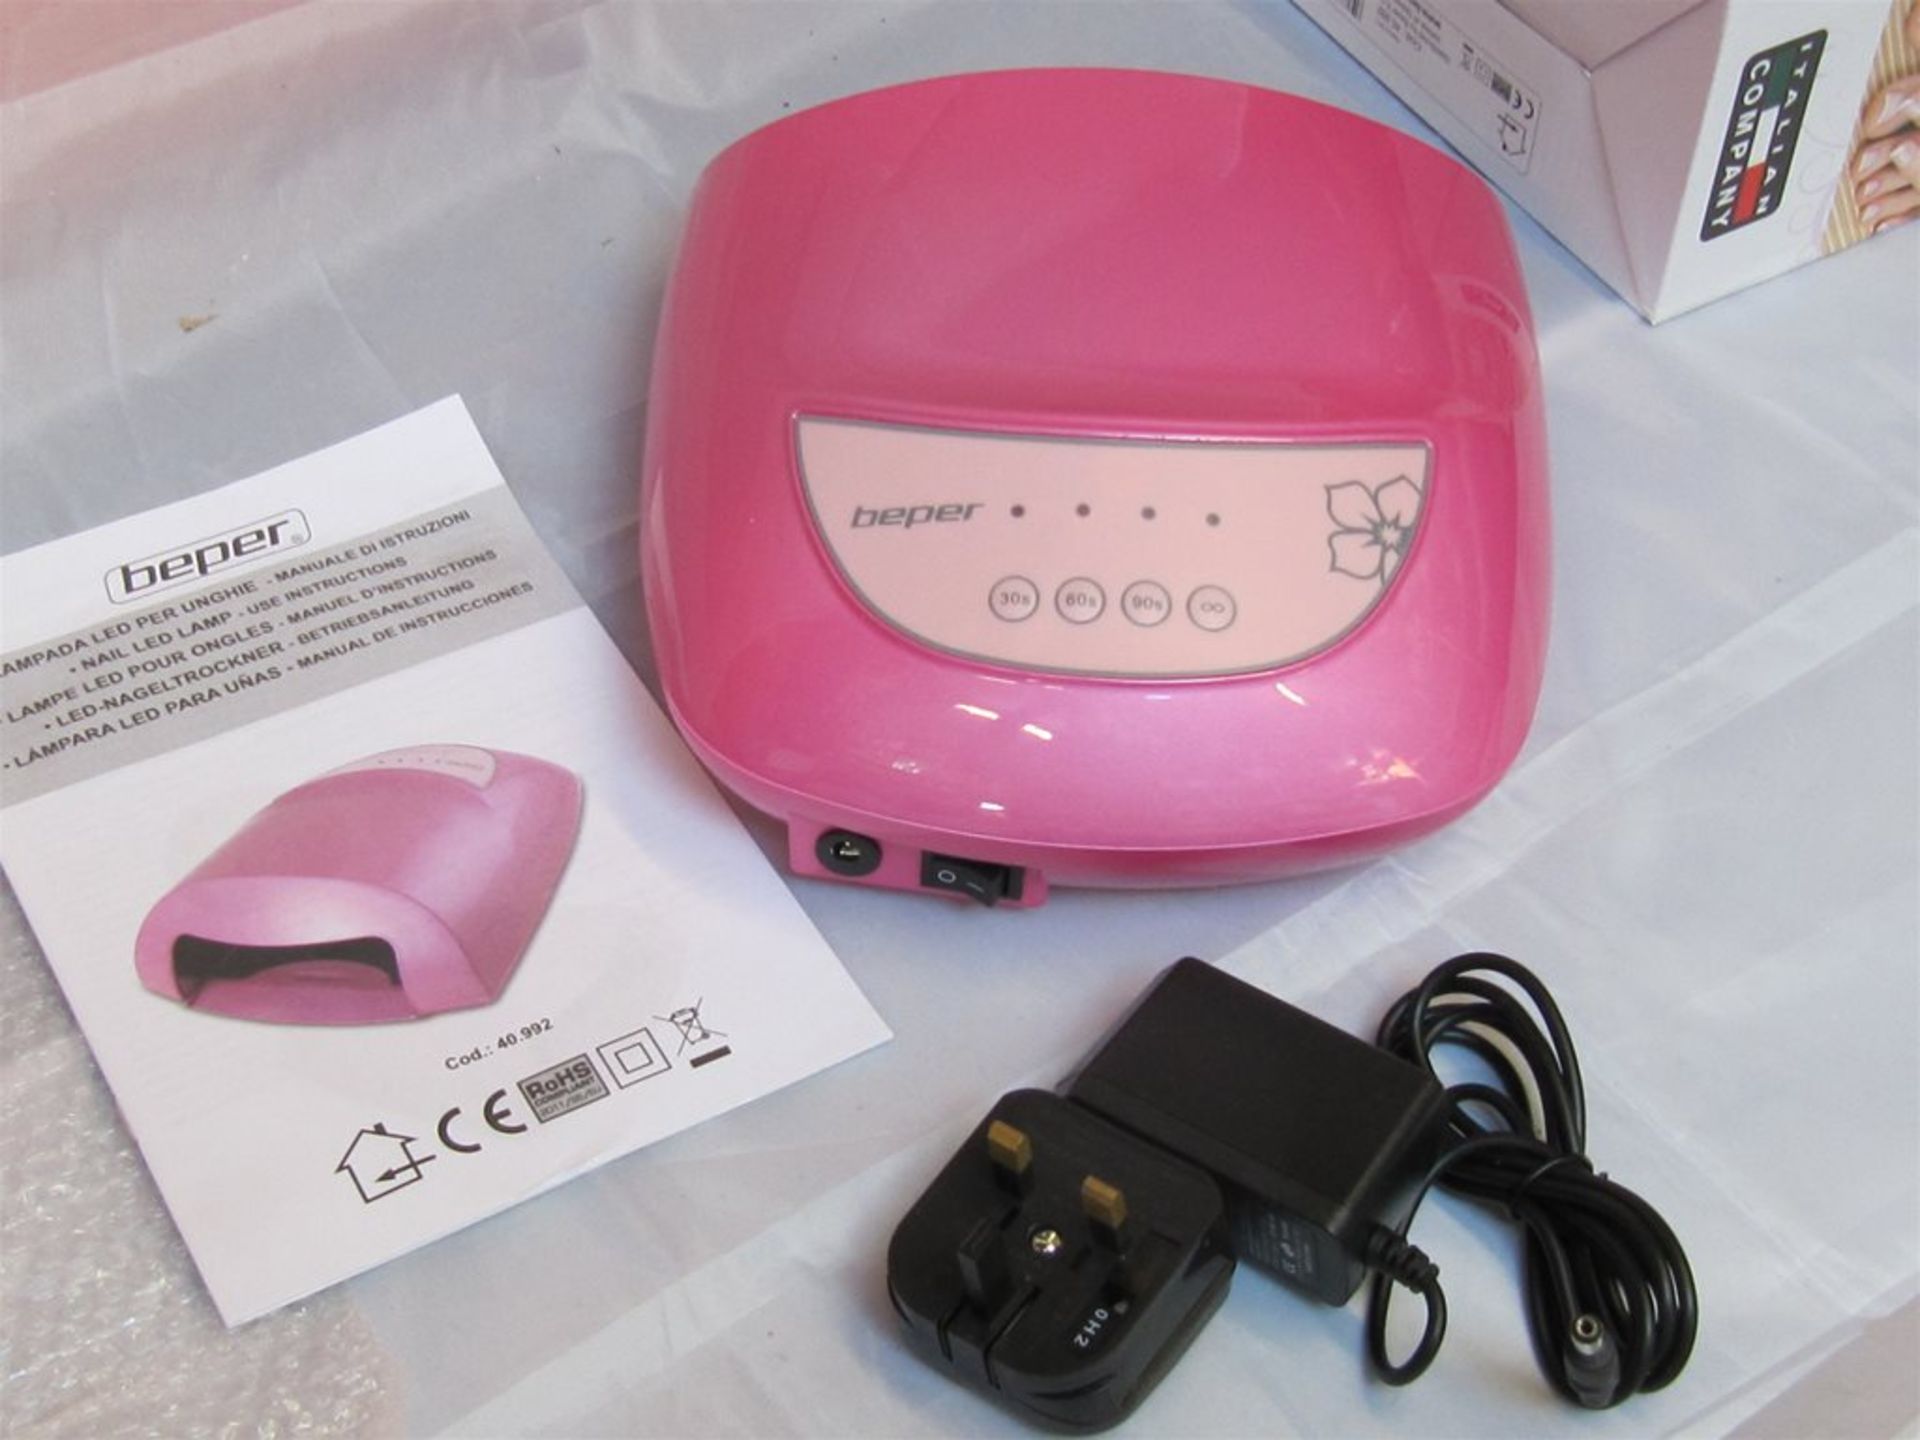 156) Beper LED Nail Lamp. 12w Rapid Dry Time. No vat on Hammer. - Image 2 of 4